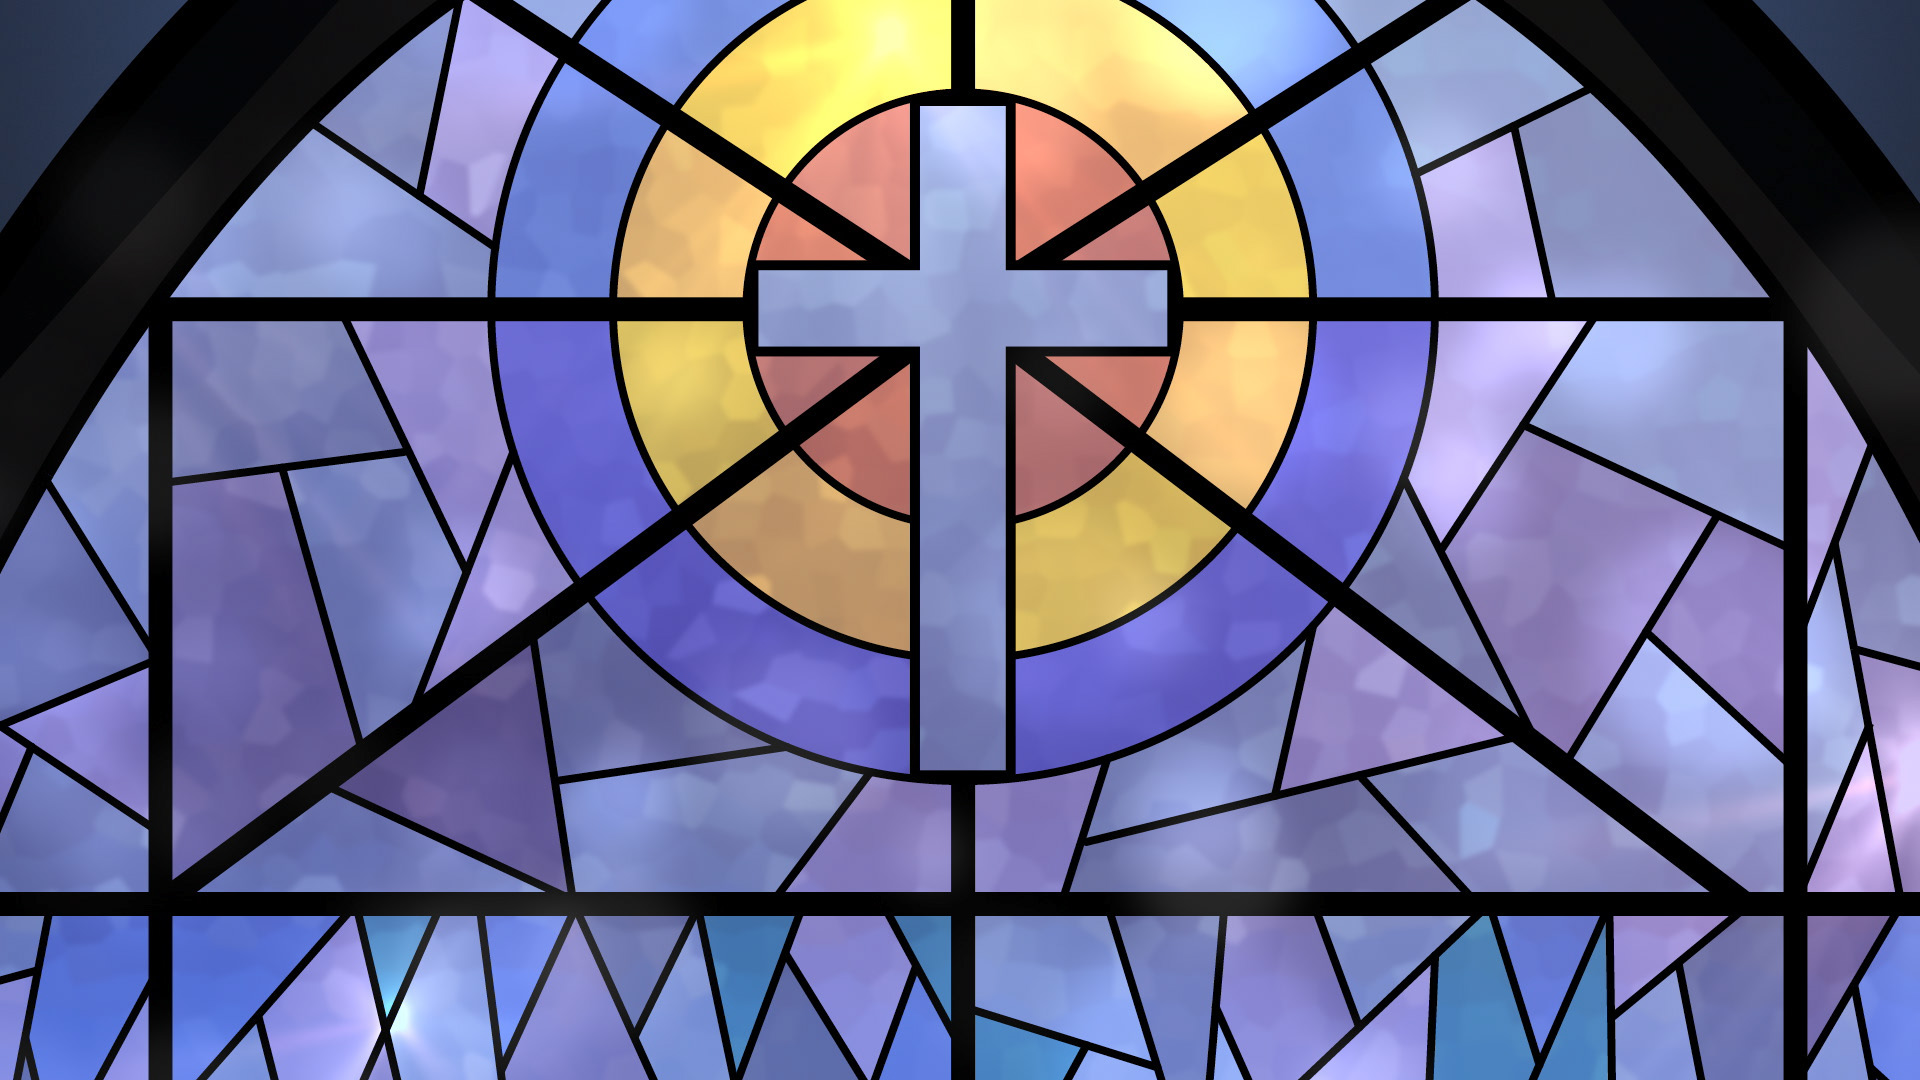 Stained glass window backgrounds